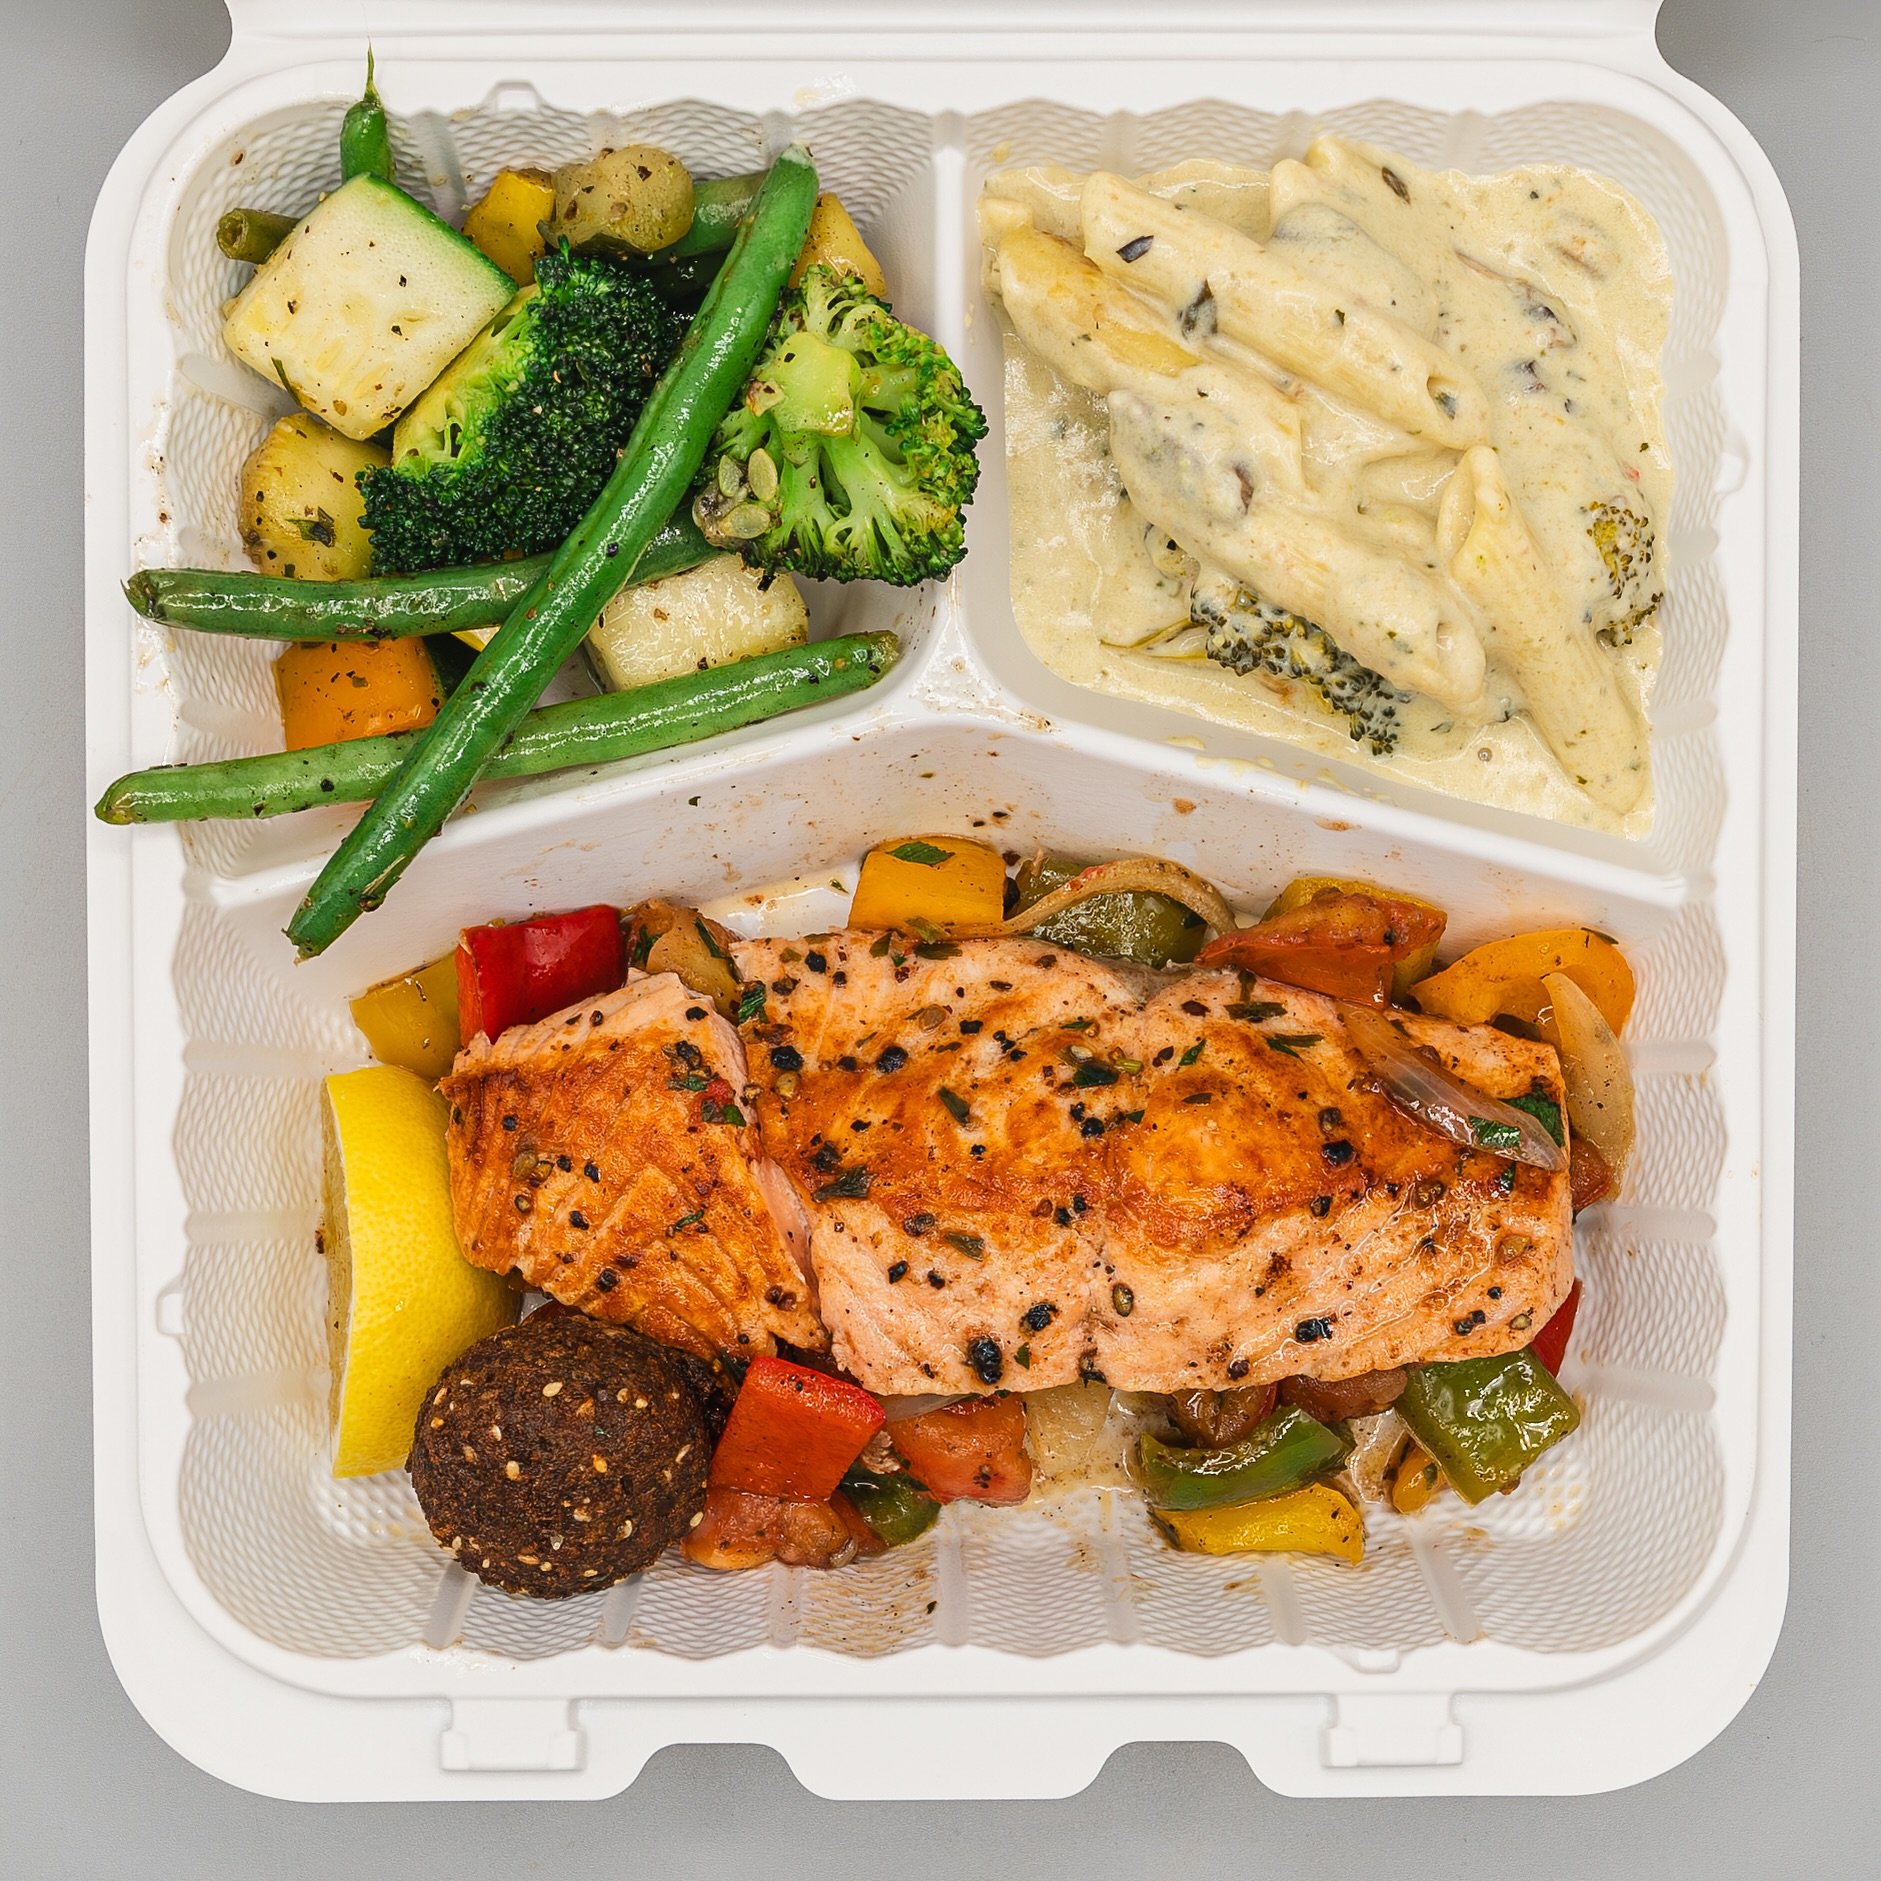 Order inspo of the day! ➡︎ Grilled veggies, pasta alfredo, salmon, and a crispy falafel to top it off!